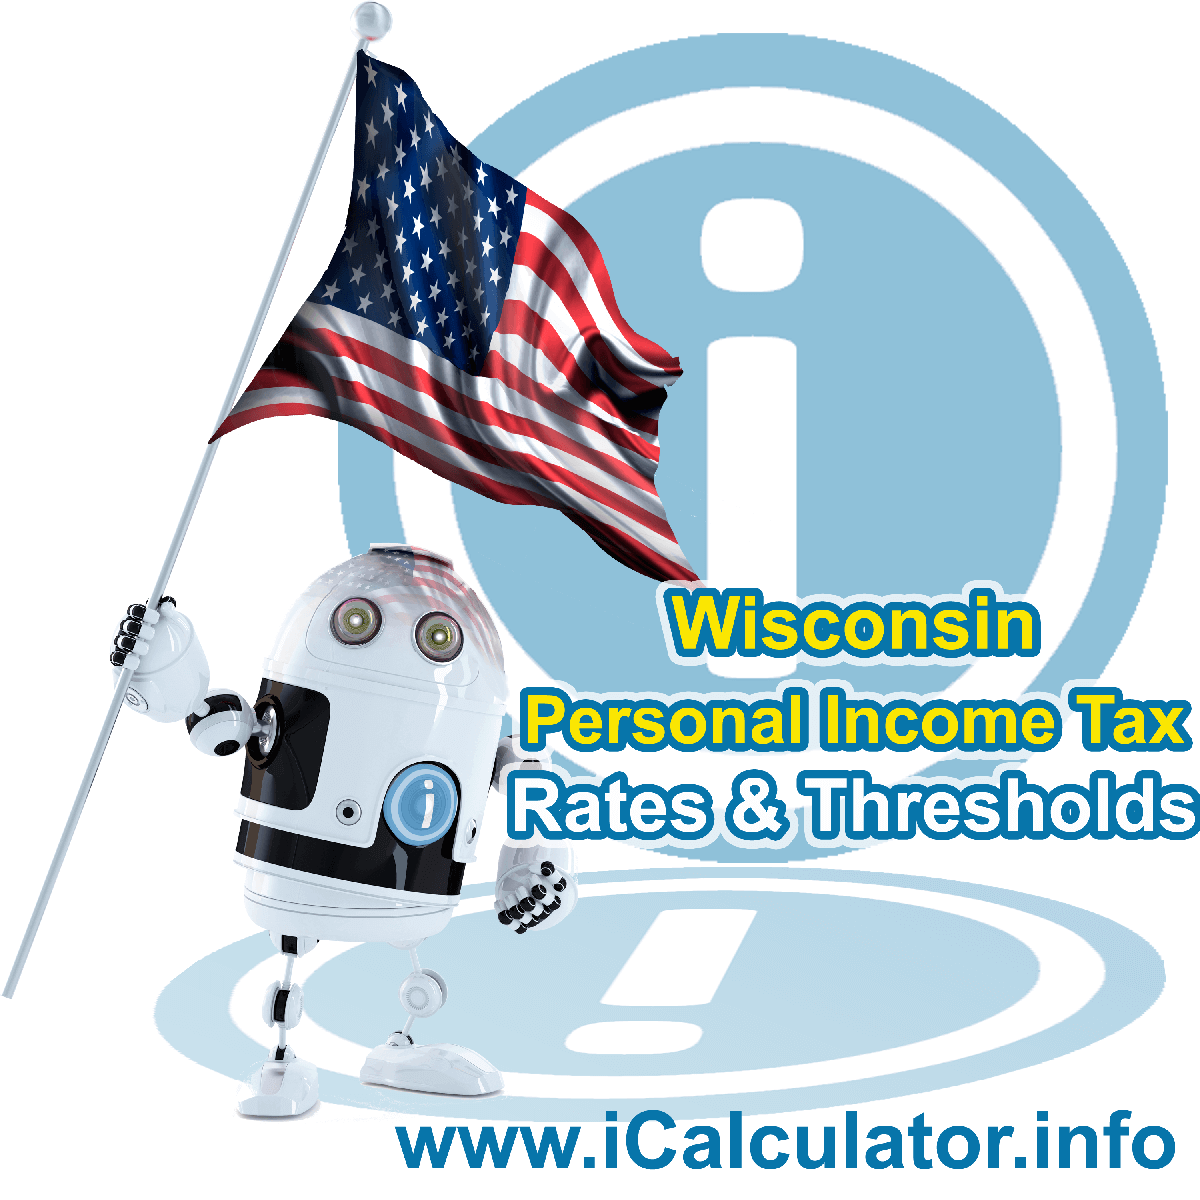 Wisconsin State Tax Tables 2015. This image displays details of the Wisconsin State Tax Tables for the 2015 tax return year which is provided in support of the 2015 US Tax Calculator